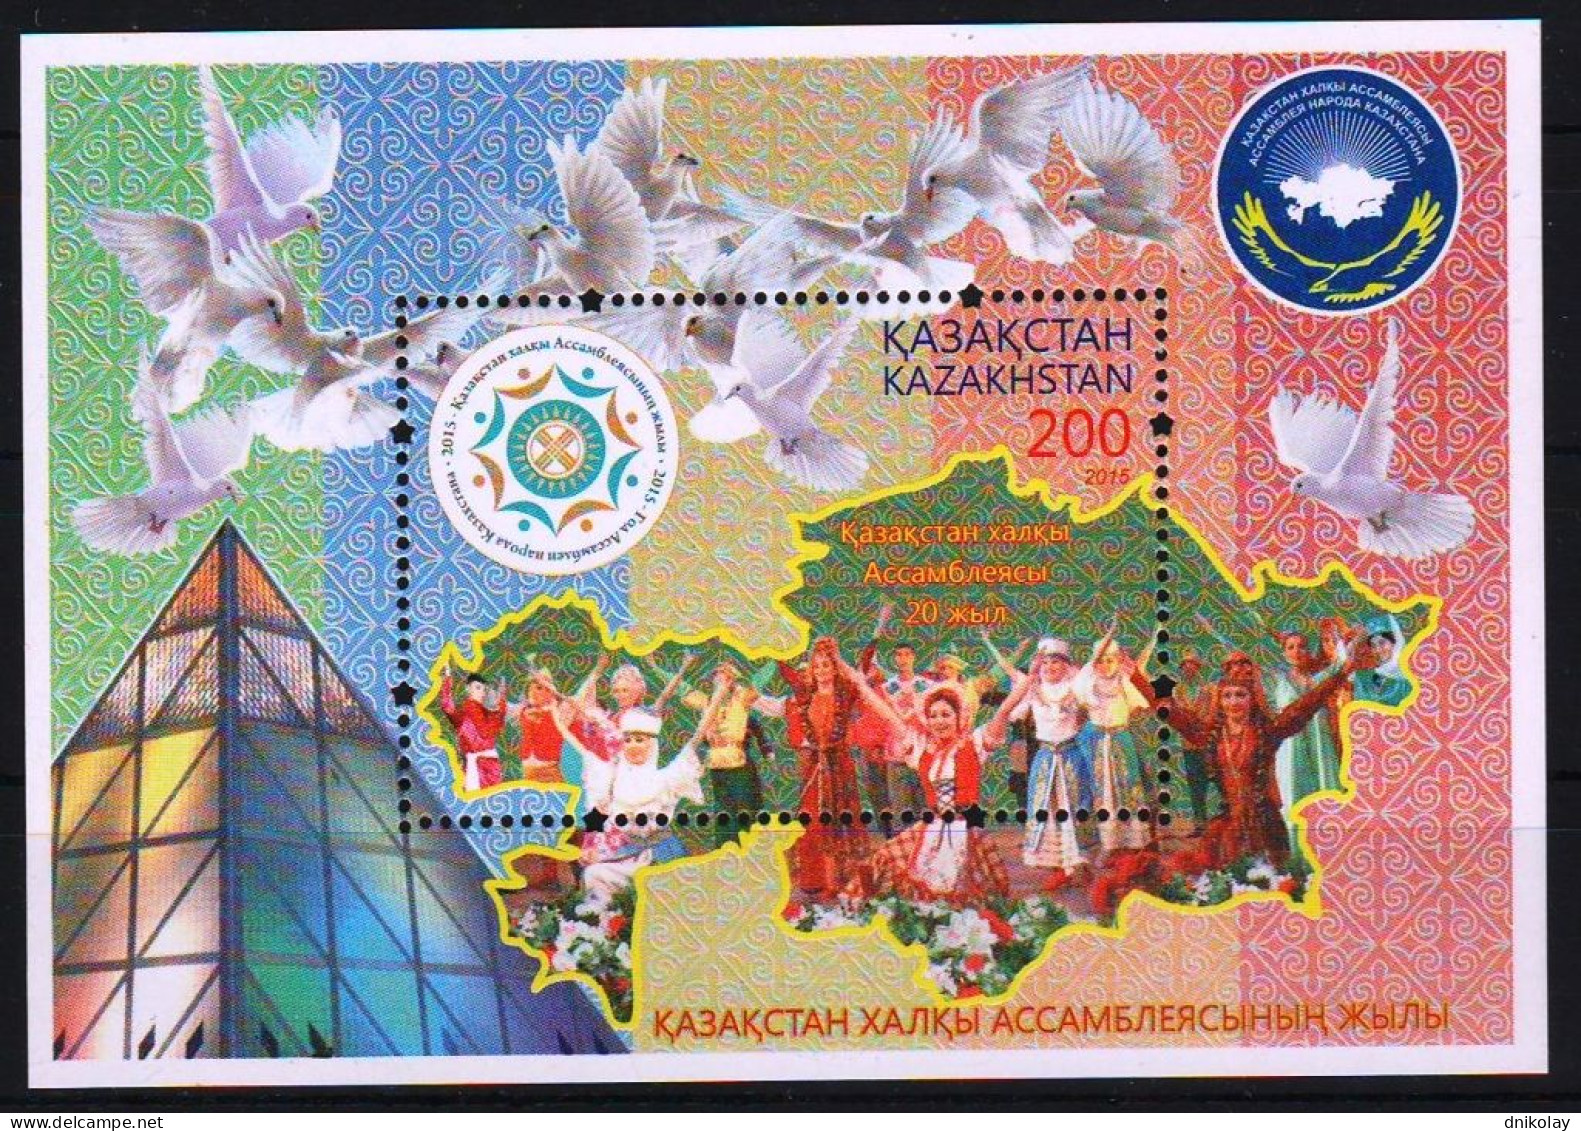 2015 902 Kazakhstan The 20th Anniversary Of The Assembly Of The People Of Kazakhstan MNH - Kazachstan